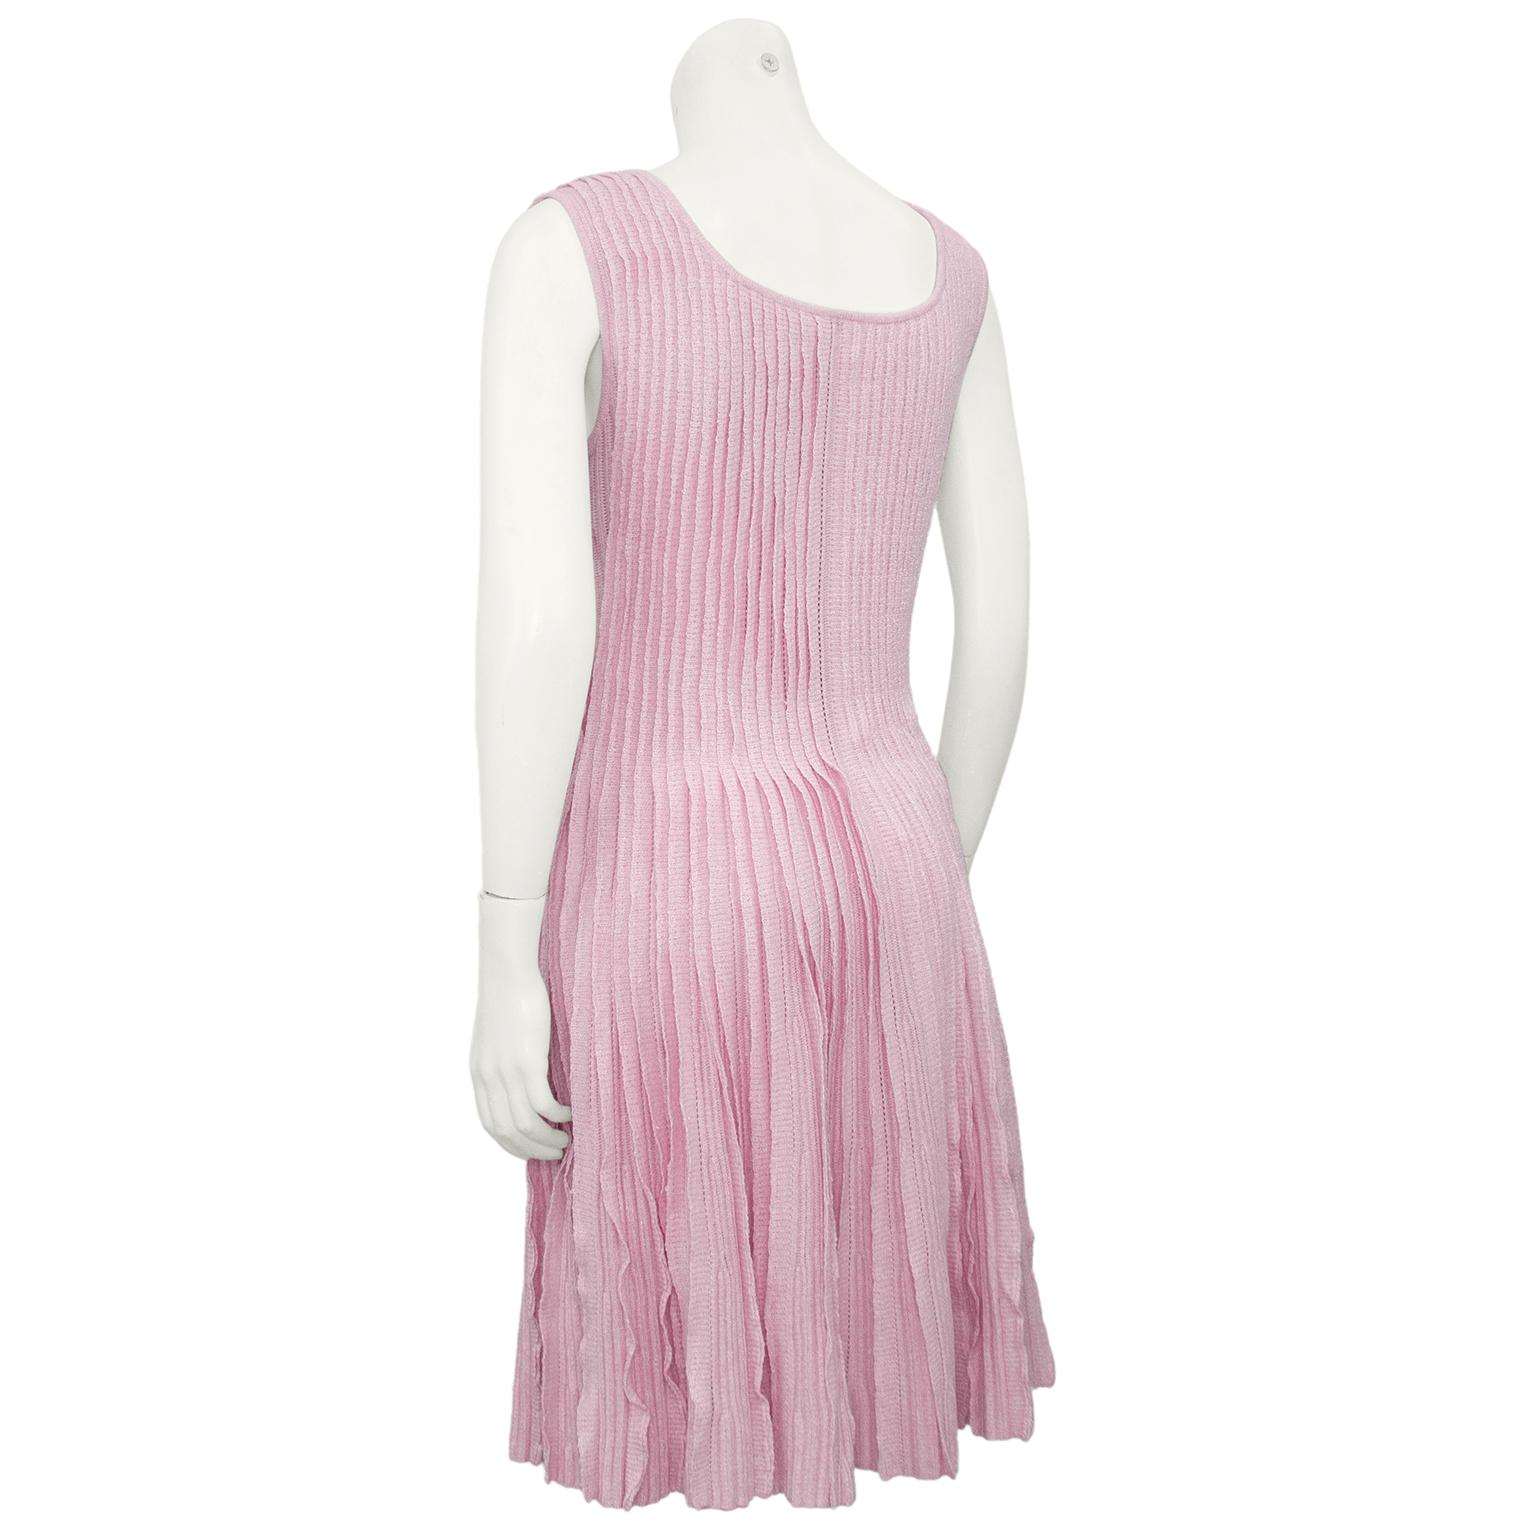 2012 Chanel Pink Linen & Cashmere Plisse Knit Dress  In Good Condition For Sale In Toronto, Ontario